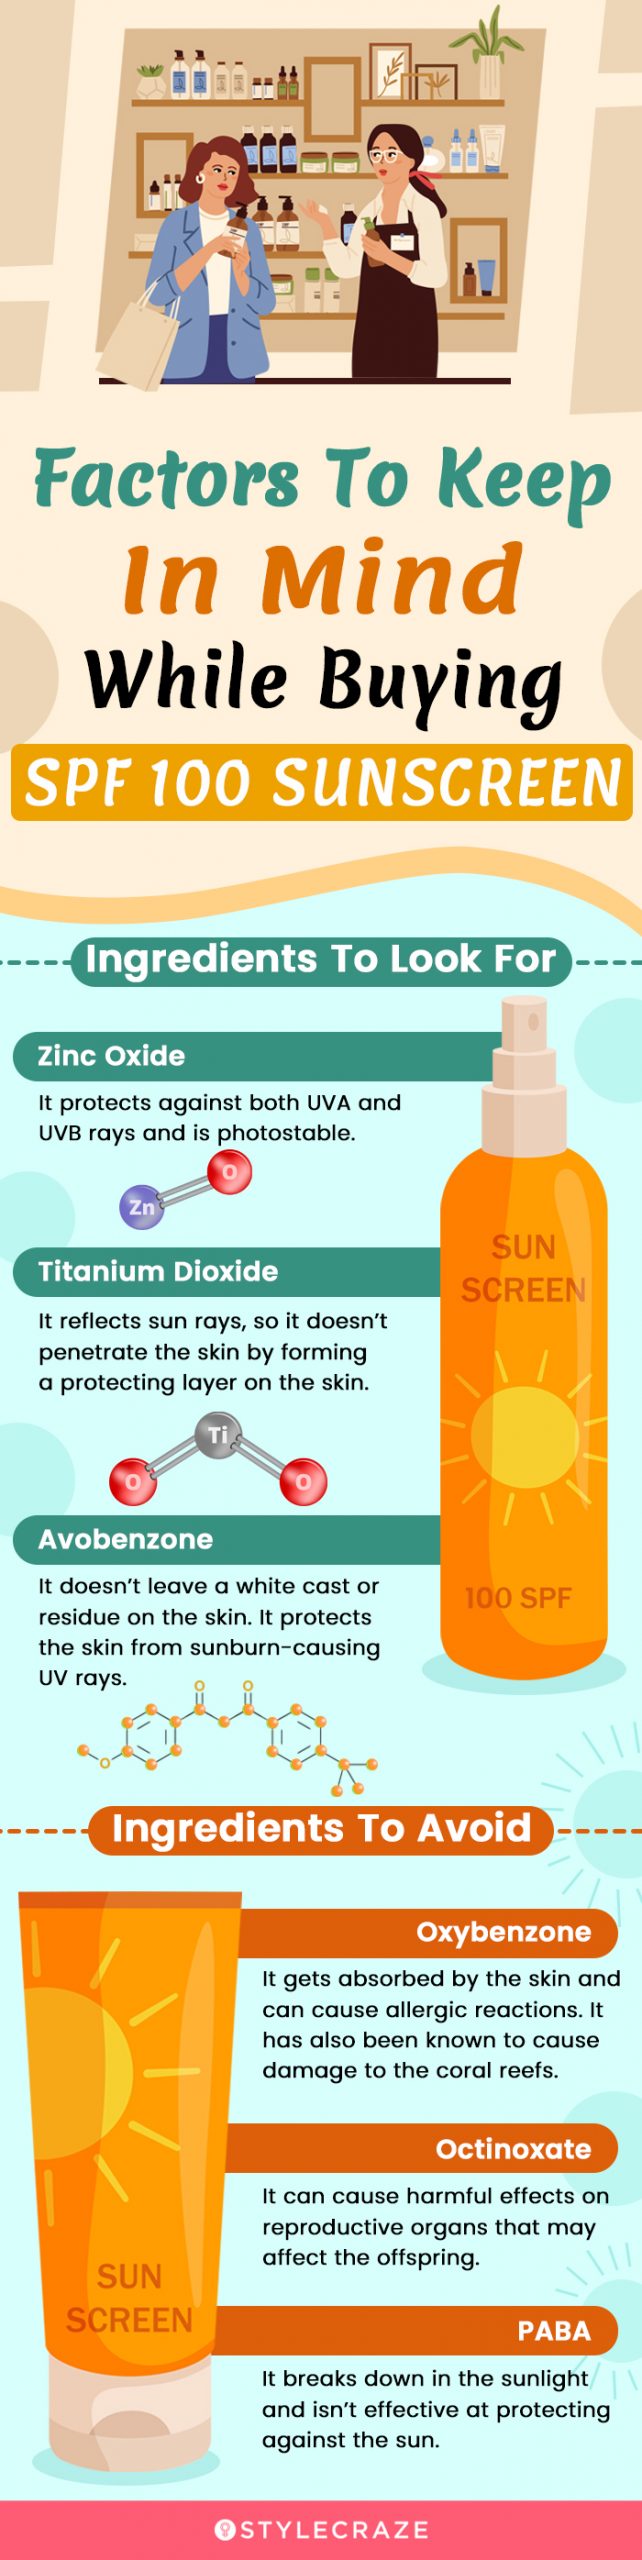 Factors To Keep In Mind While Buying SPF 100 Sunscreen (infographic)